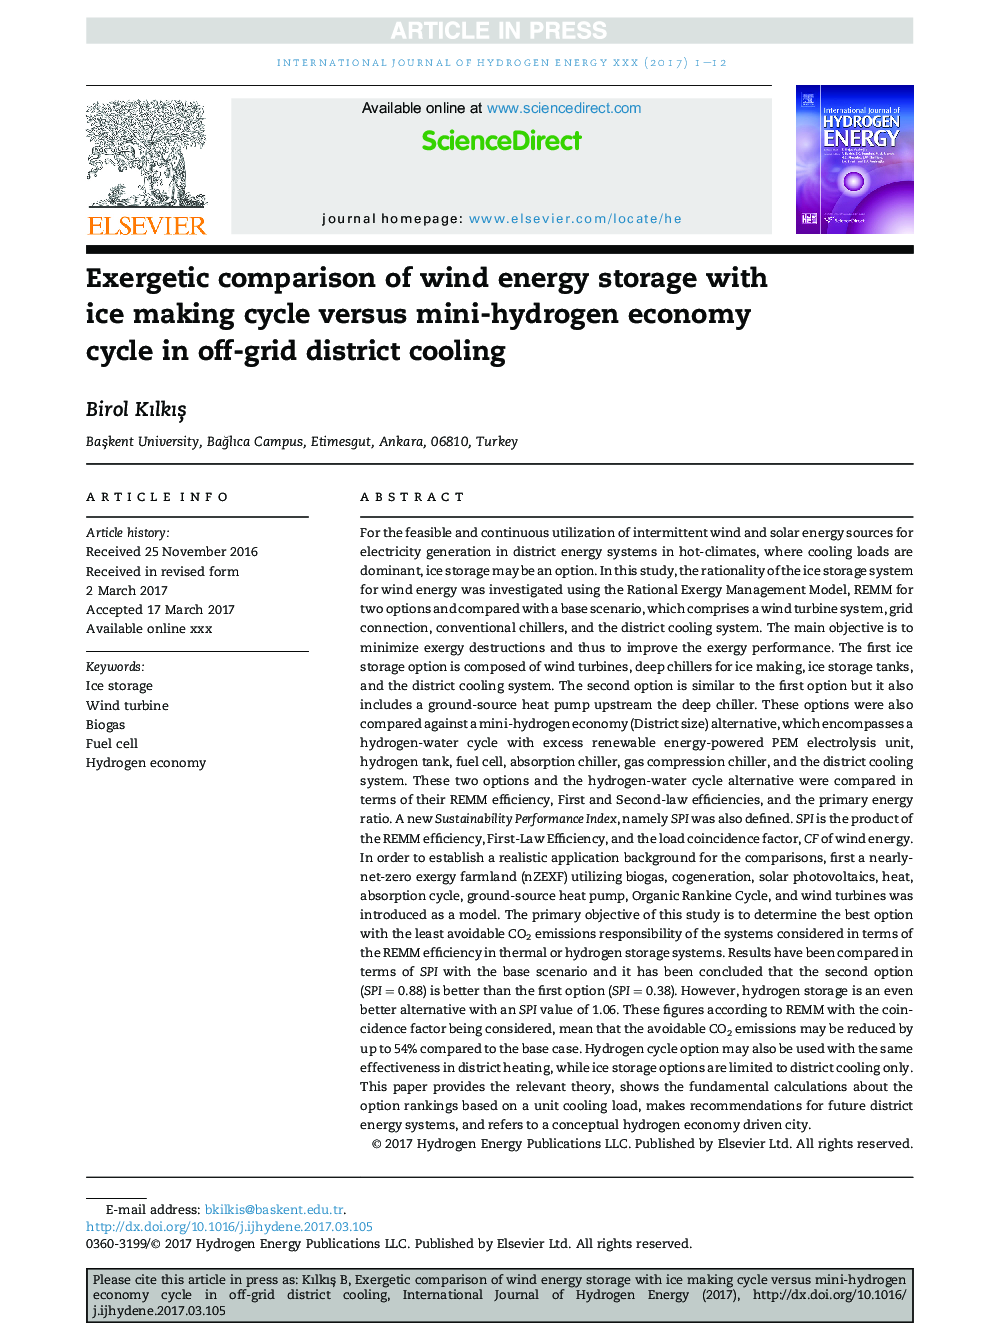 Exergetic comparison of wind energy storage with ice making cycle versus mini-hydrogen economy cycle in off-grid district cooling